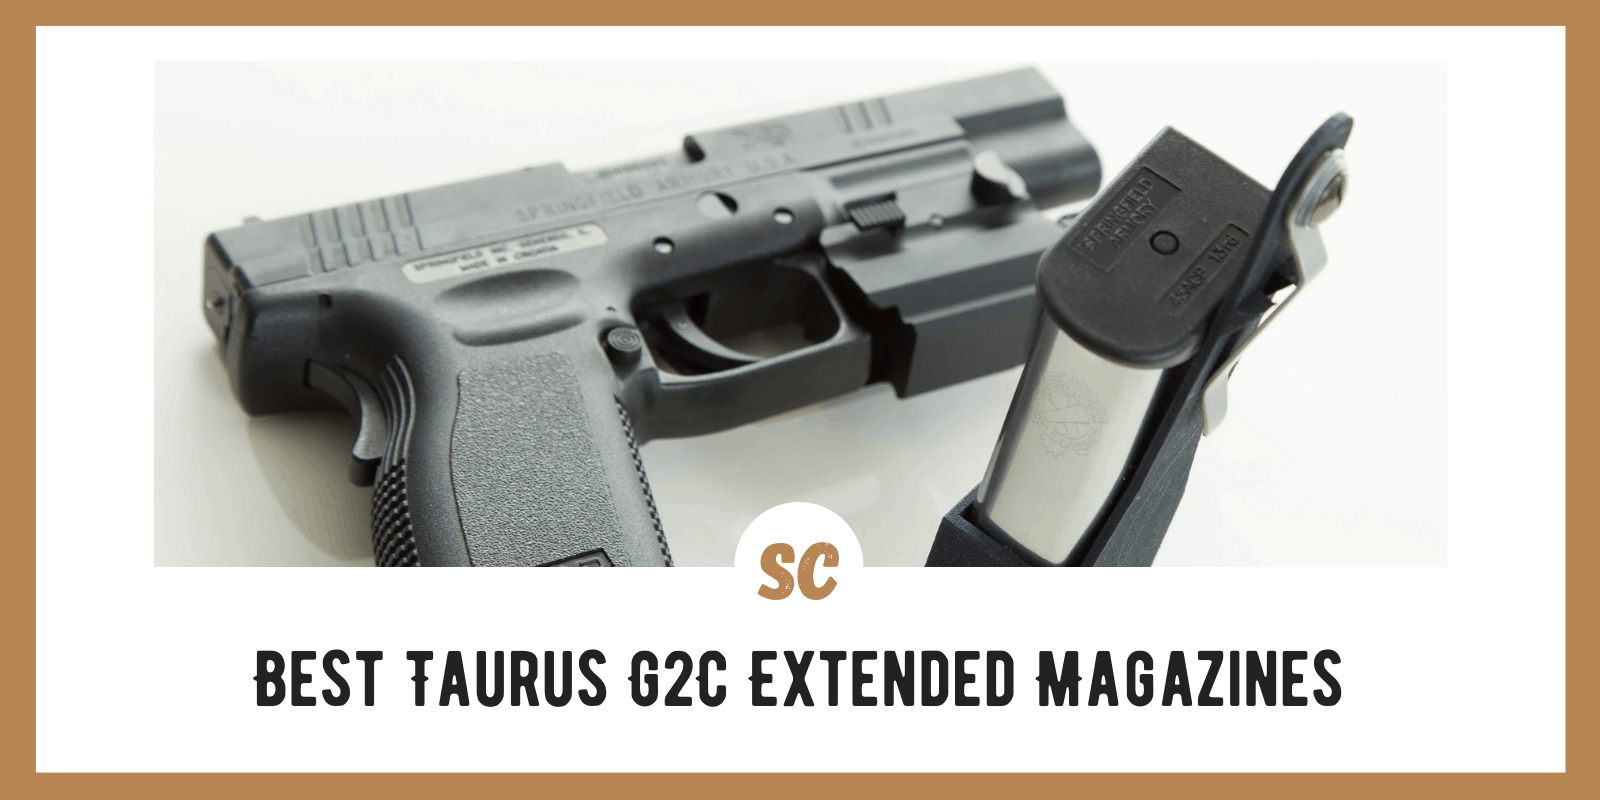 Best Taurus G2C Extended Magazines: My Experiences